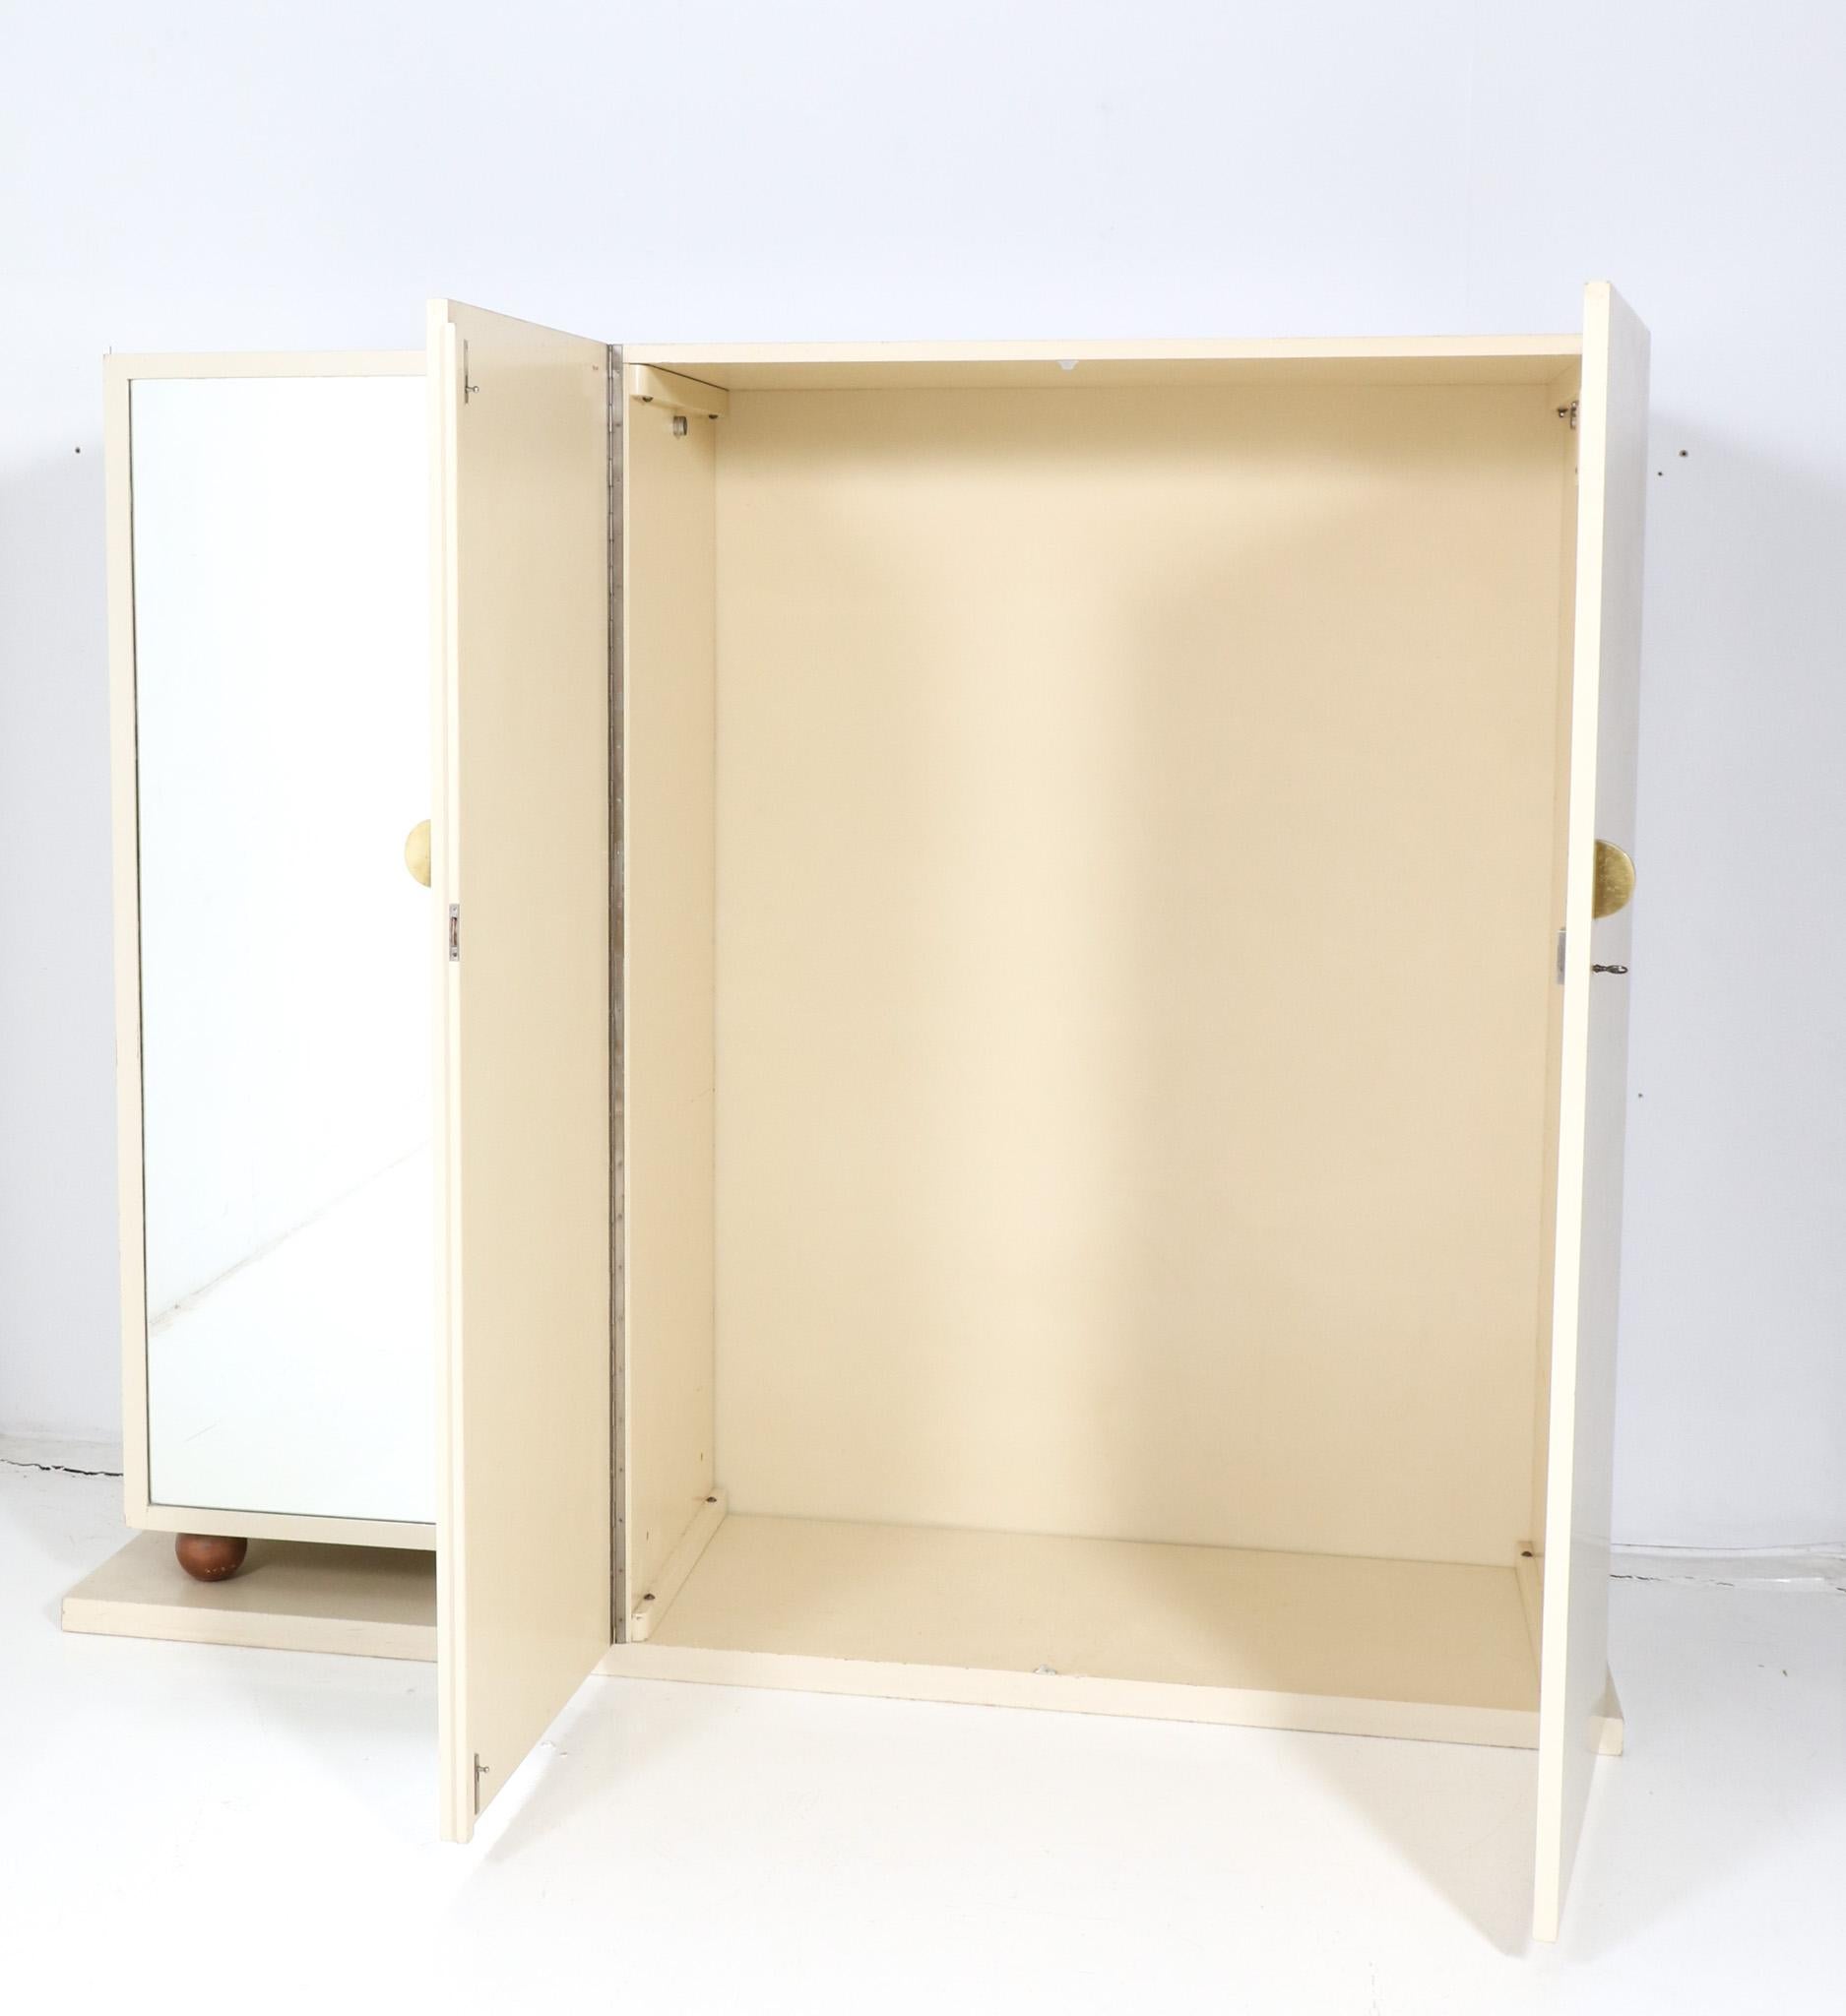 Mirror Lacquered Wooden Art Deco Modernist Armoire or Wardrobe by Fer Semey for Pander For Sale